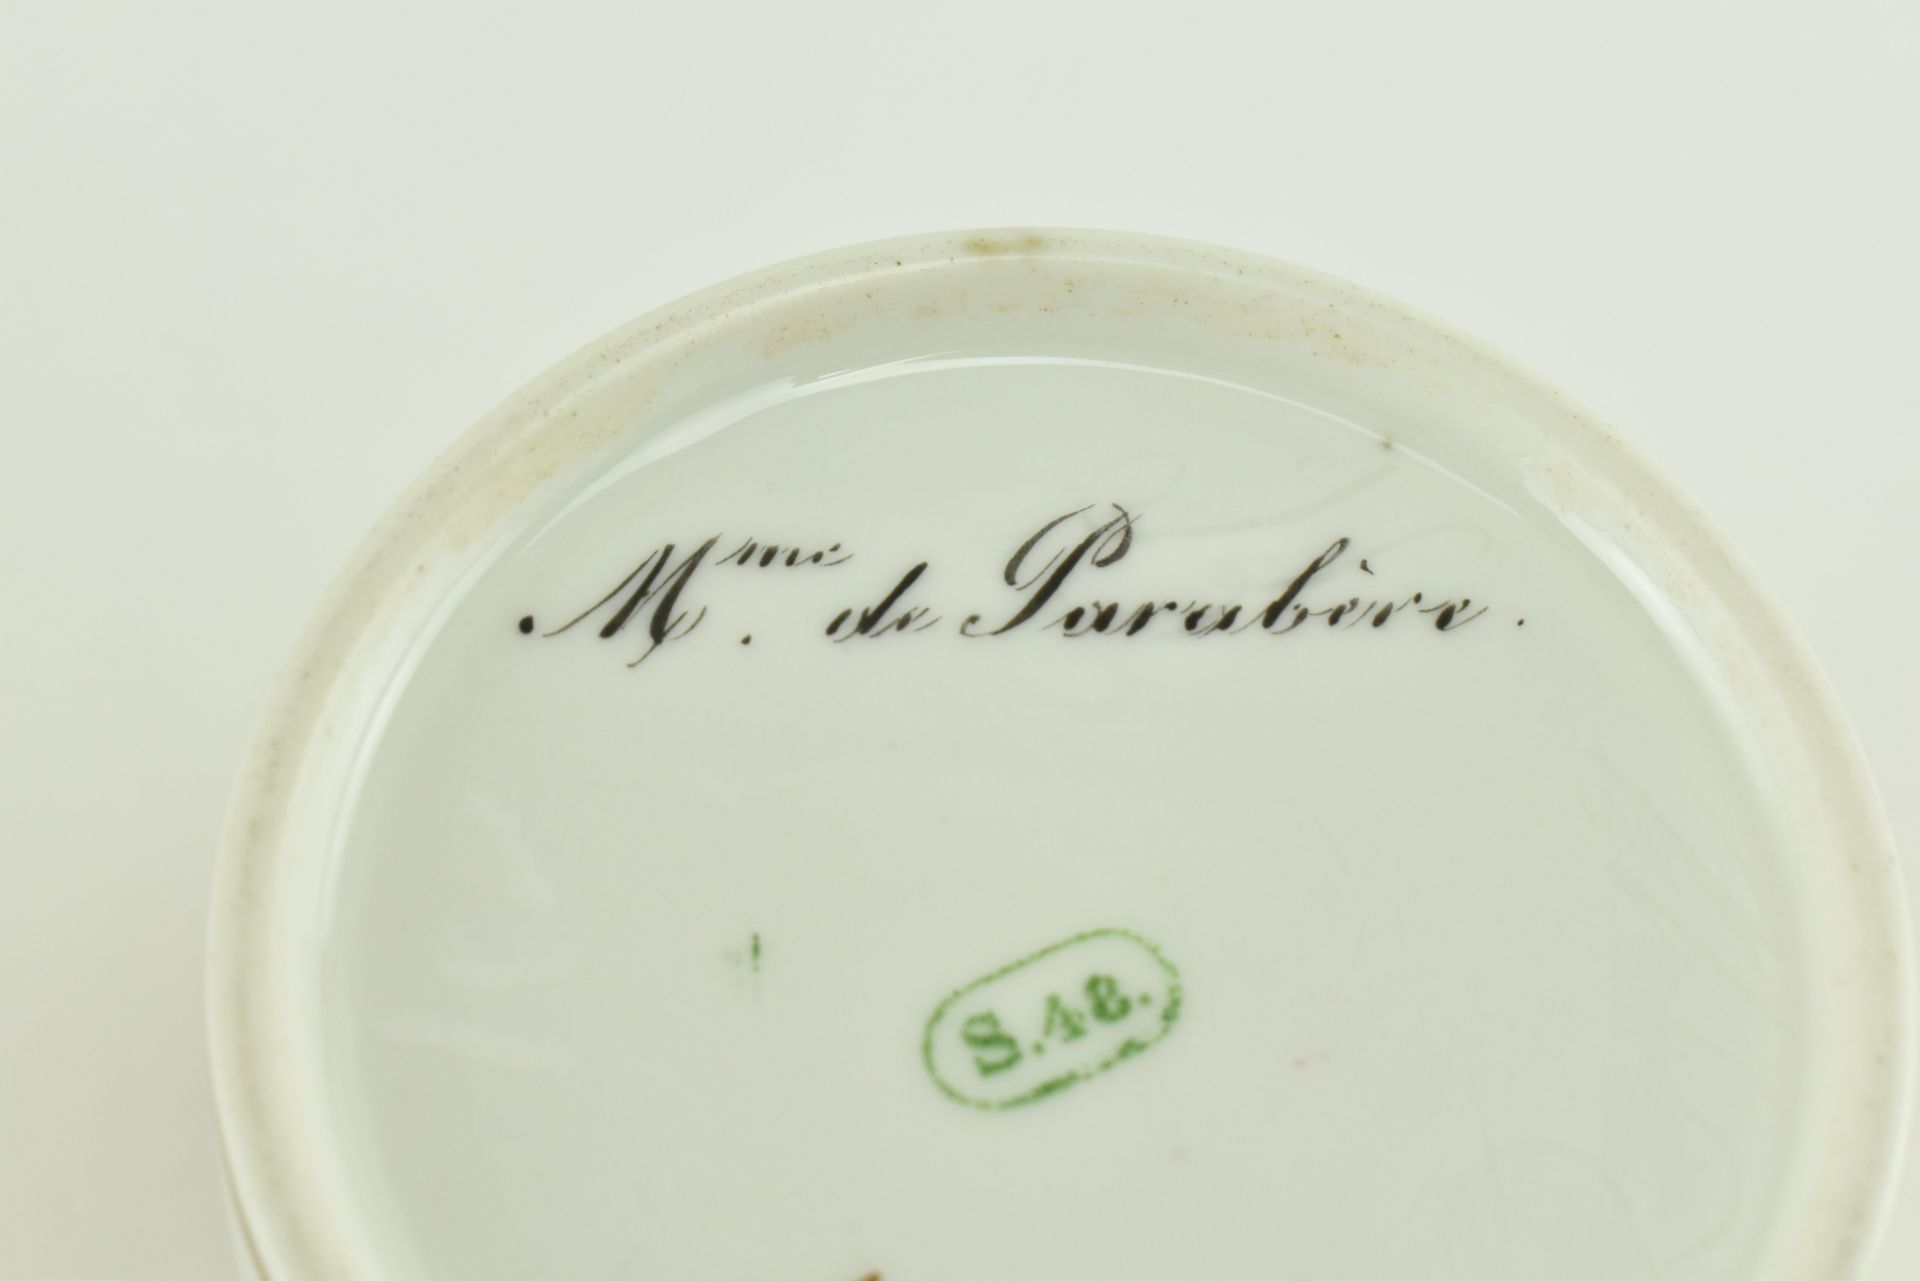 FRENCH - SEVRES LOUIS PHILIPPE - M. DE PARABIRE CUP & SAUCER - Image 8 of 8